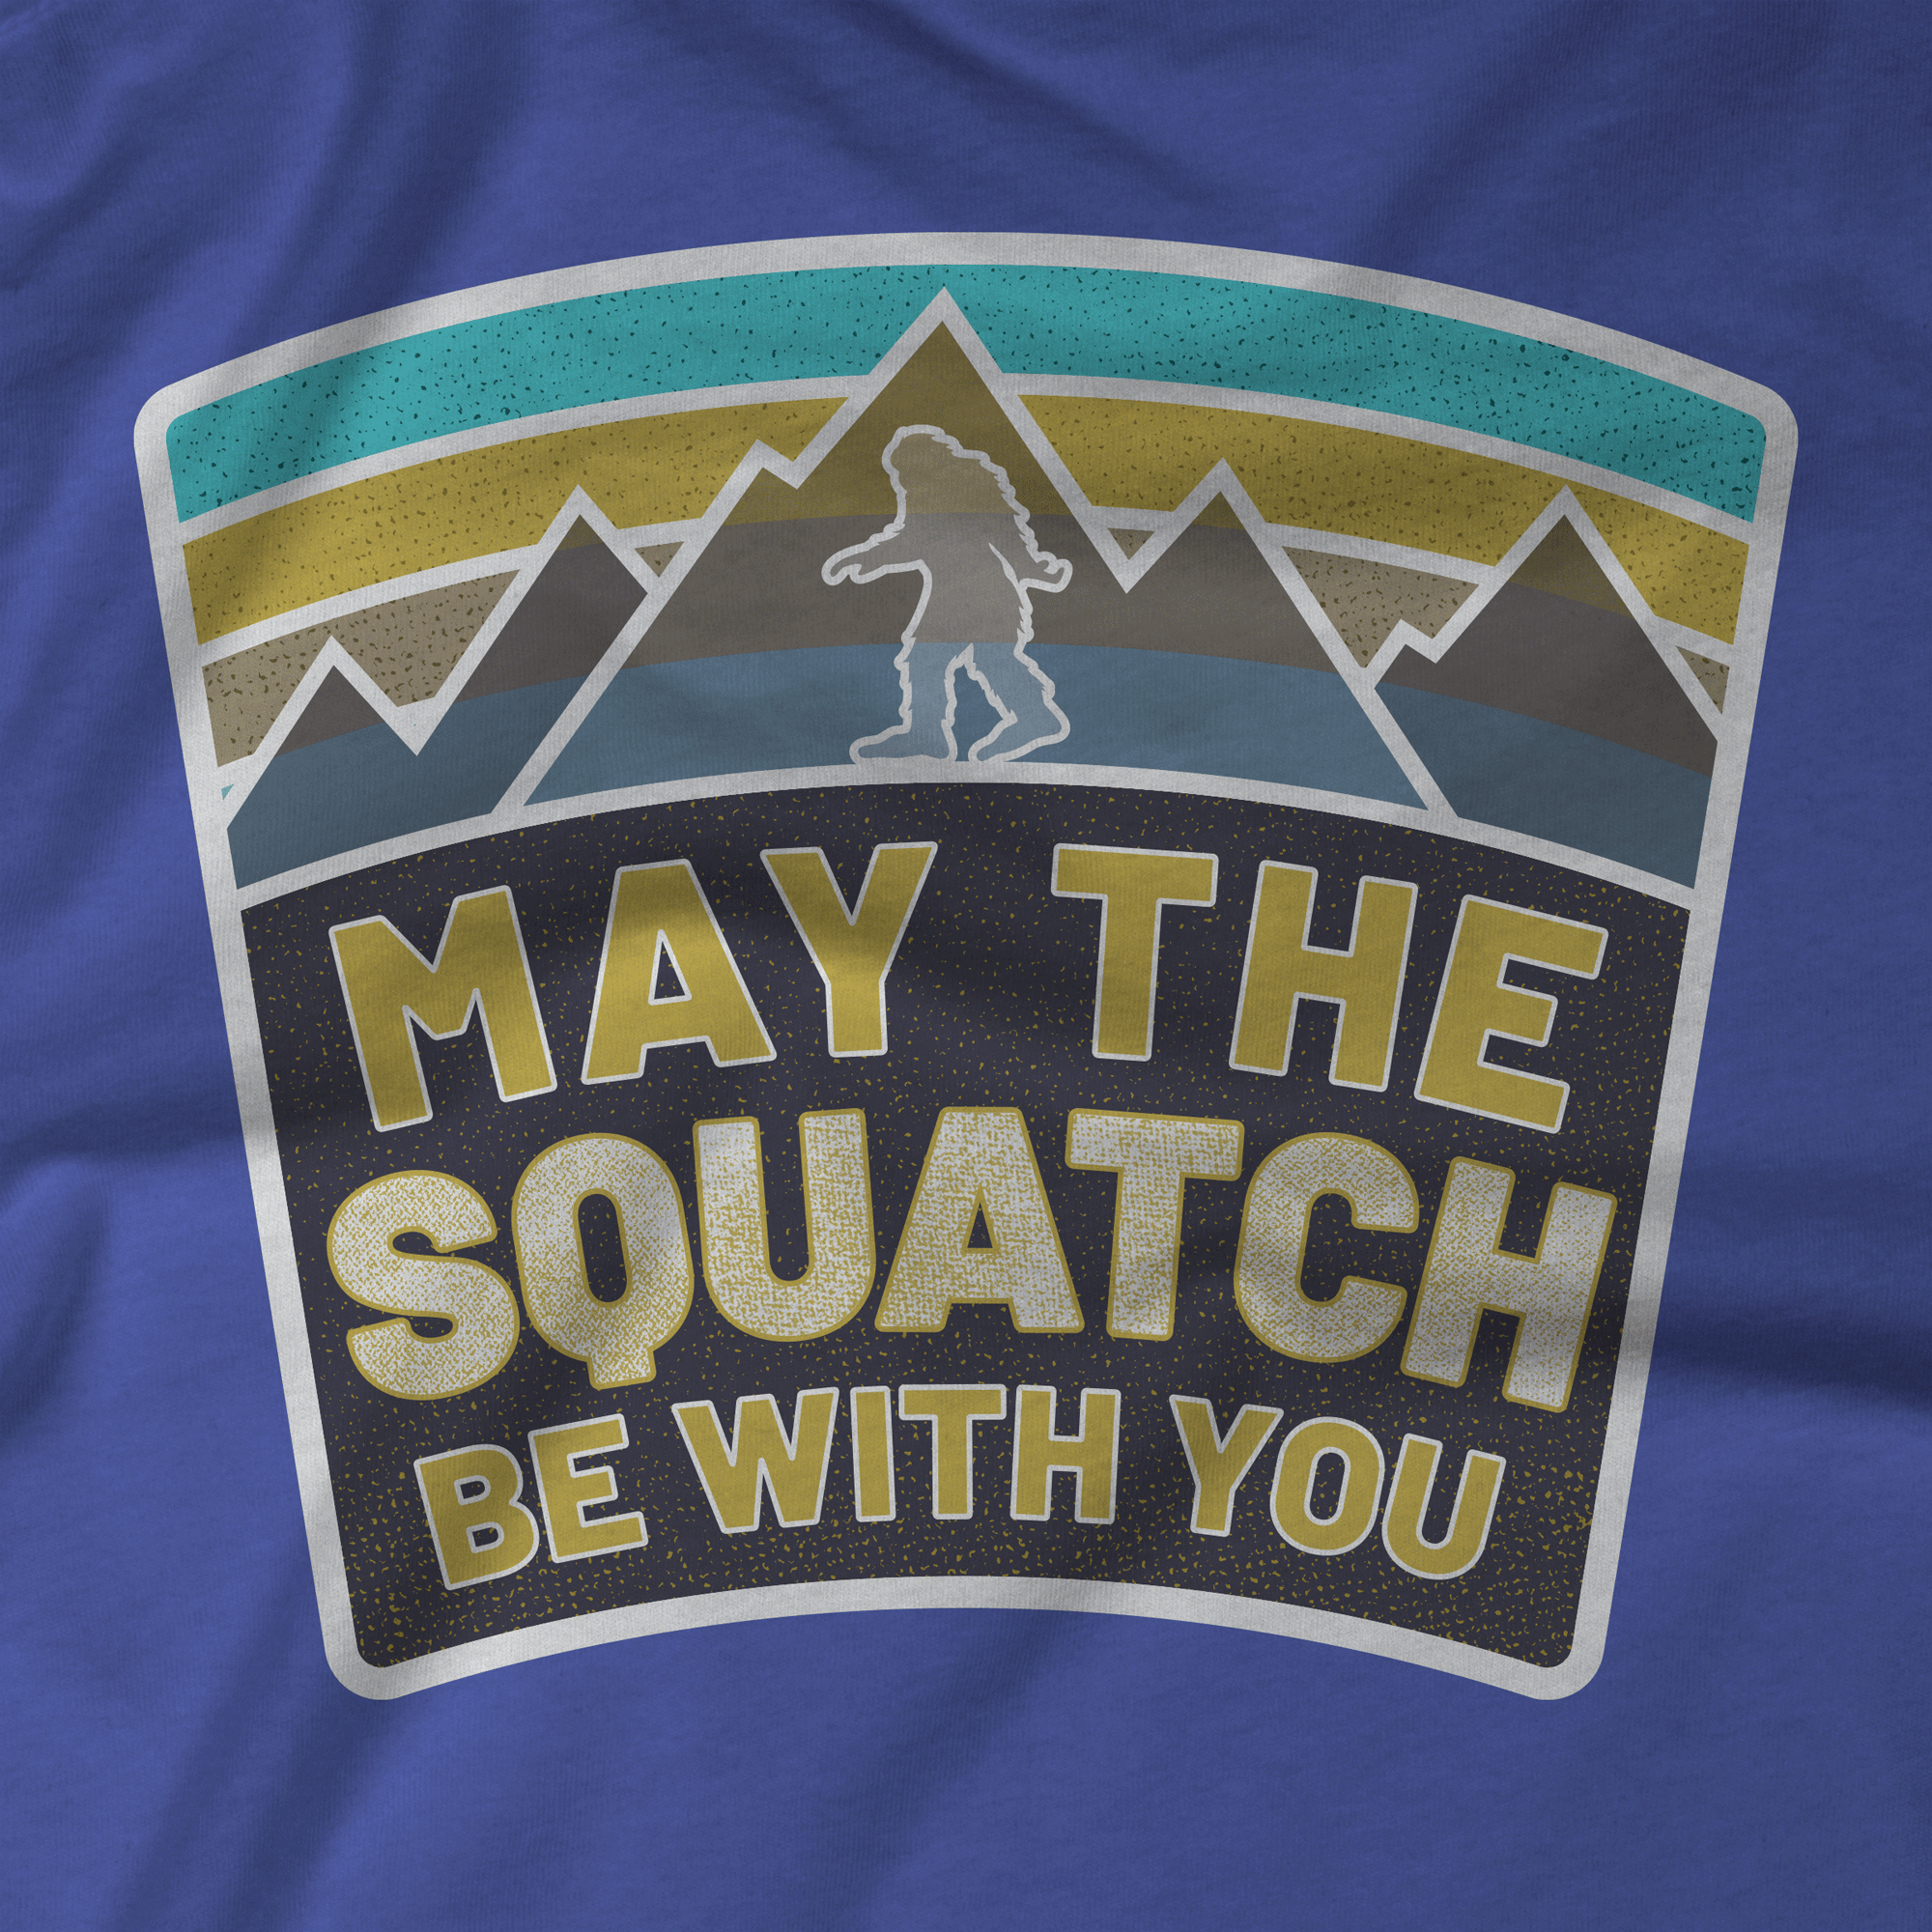 May The Squatch Be With You T-Shirt